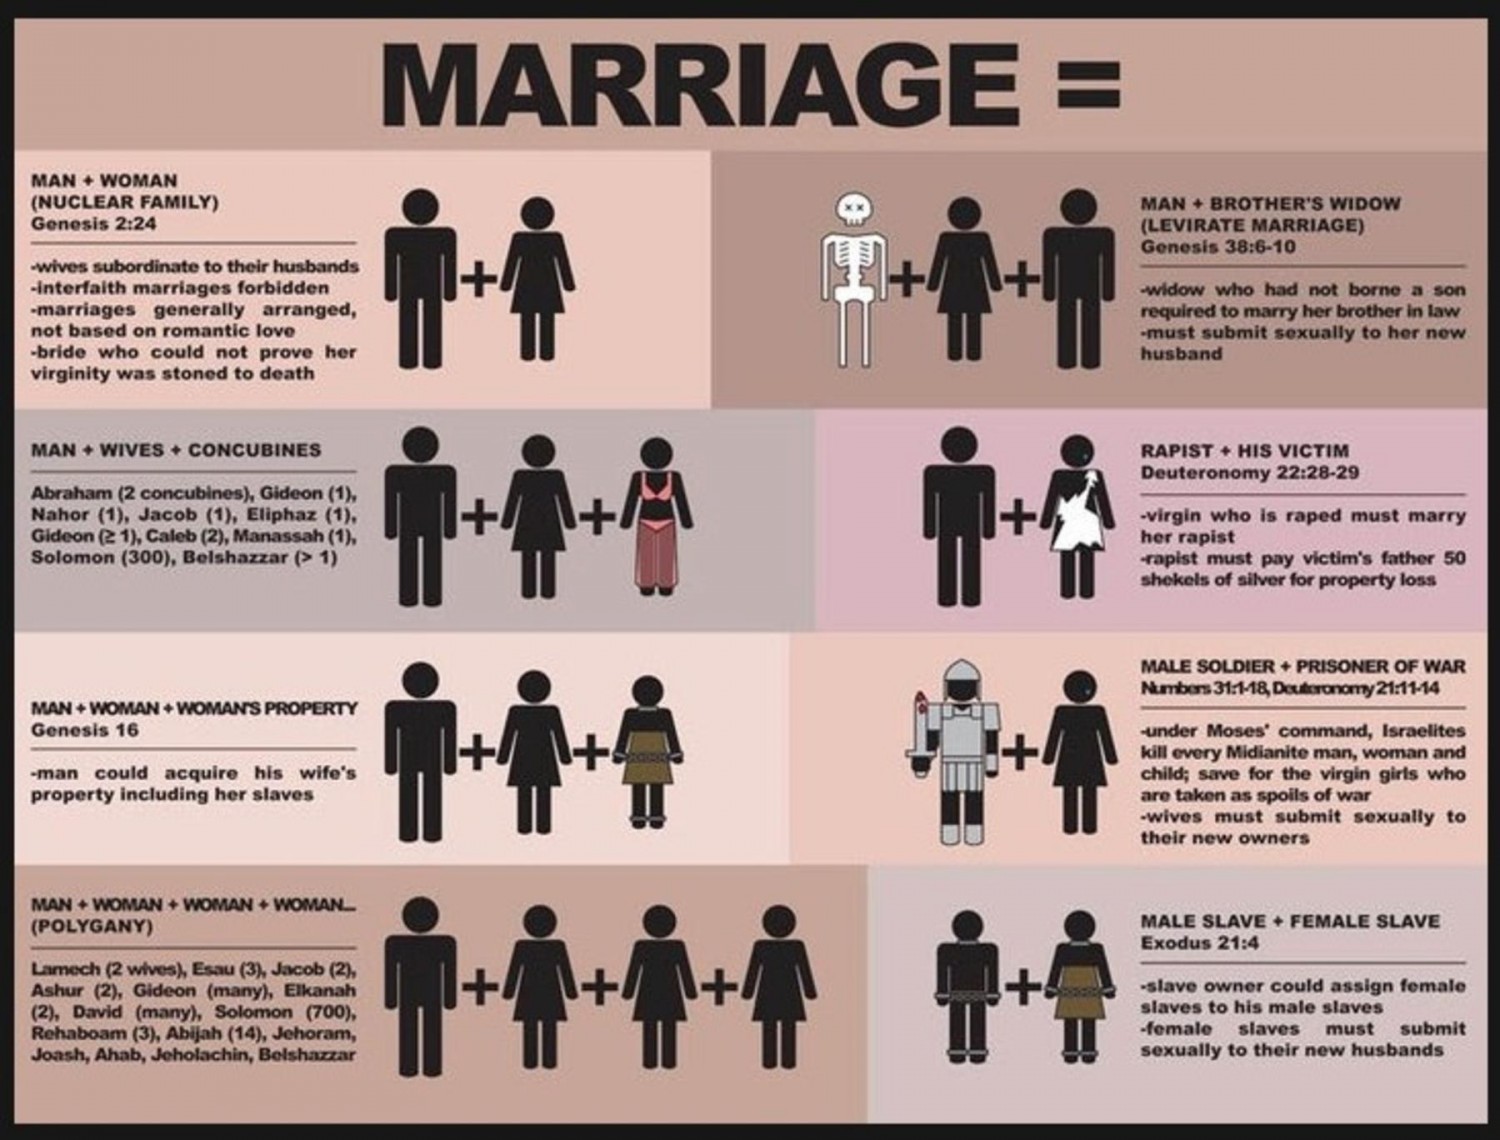 marriage-according-to-the-bible_502913cd3d101_w1500